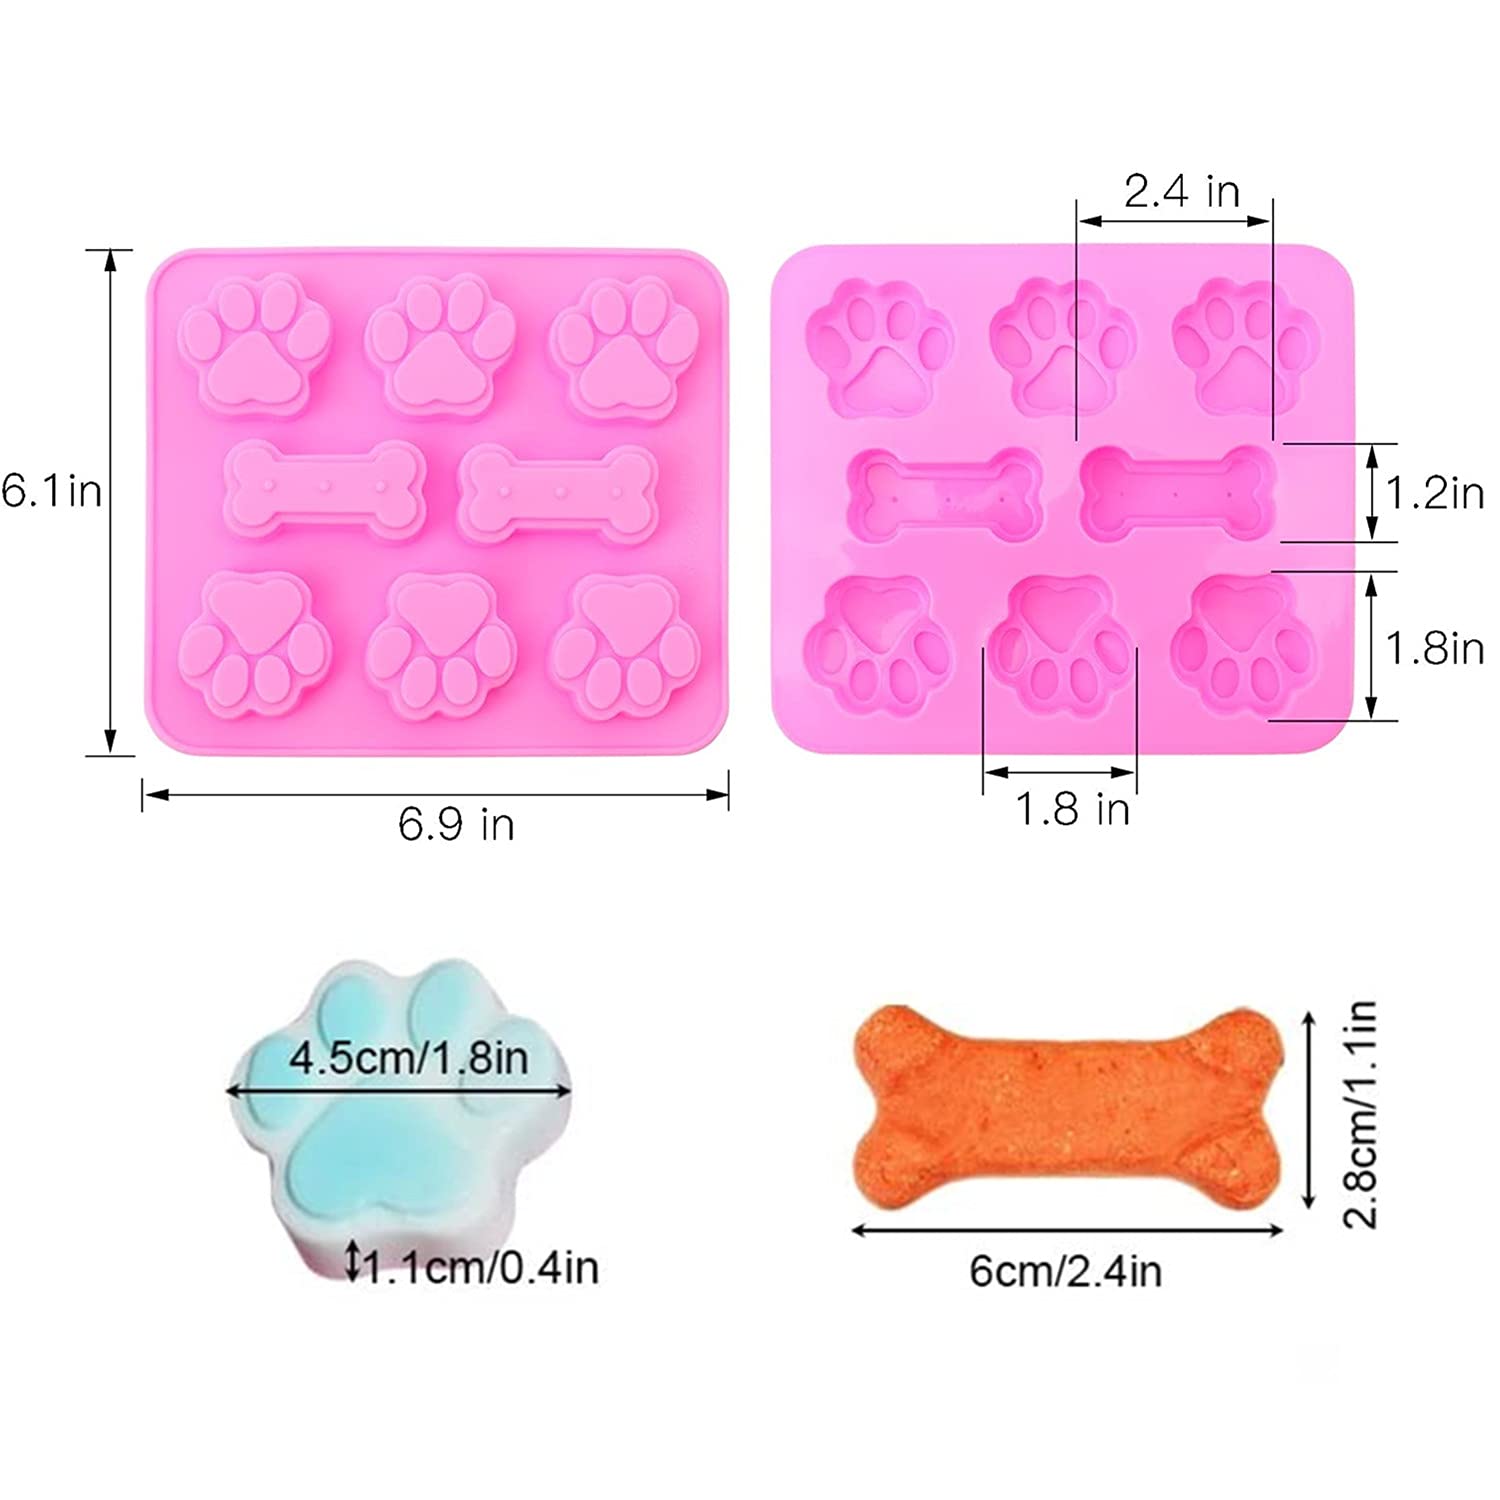 WSZBDR 2 Pack Silicone Molds Puppy Dog Paw and Dog Bone Silicone Dog Treat Molds for Baking Chocolate,Candy,Jelly,Ice Cube,Dog Treats